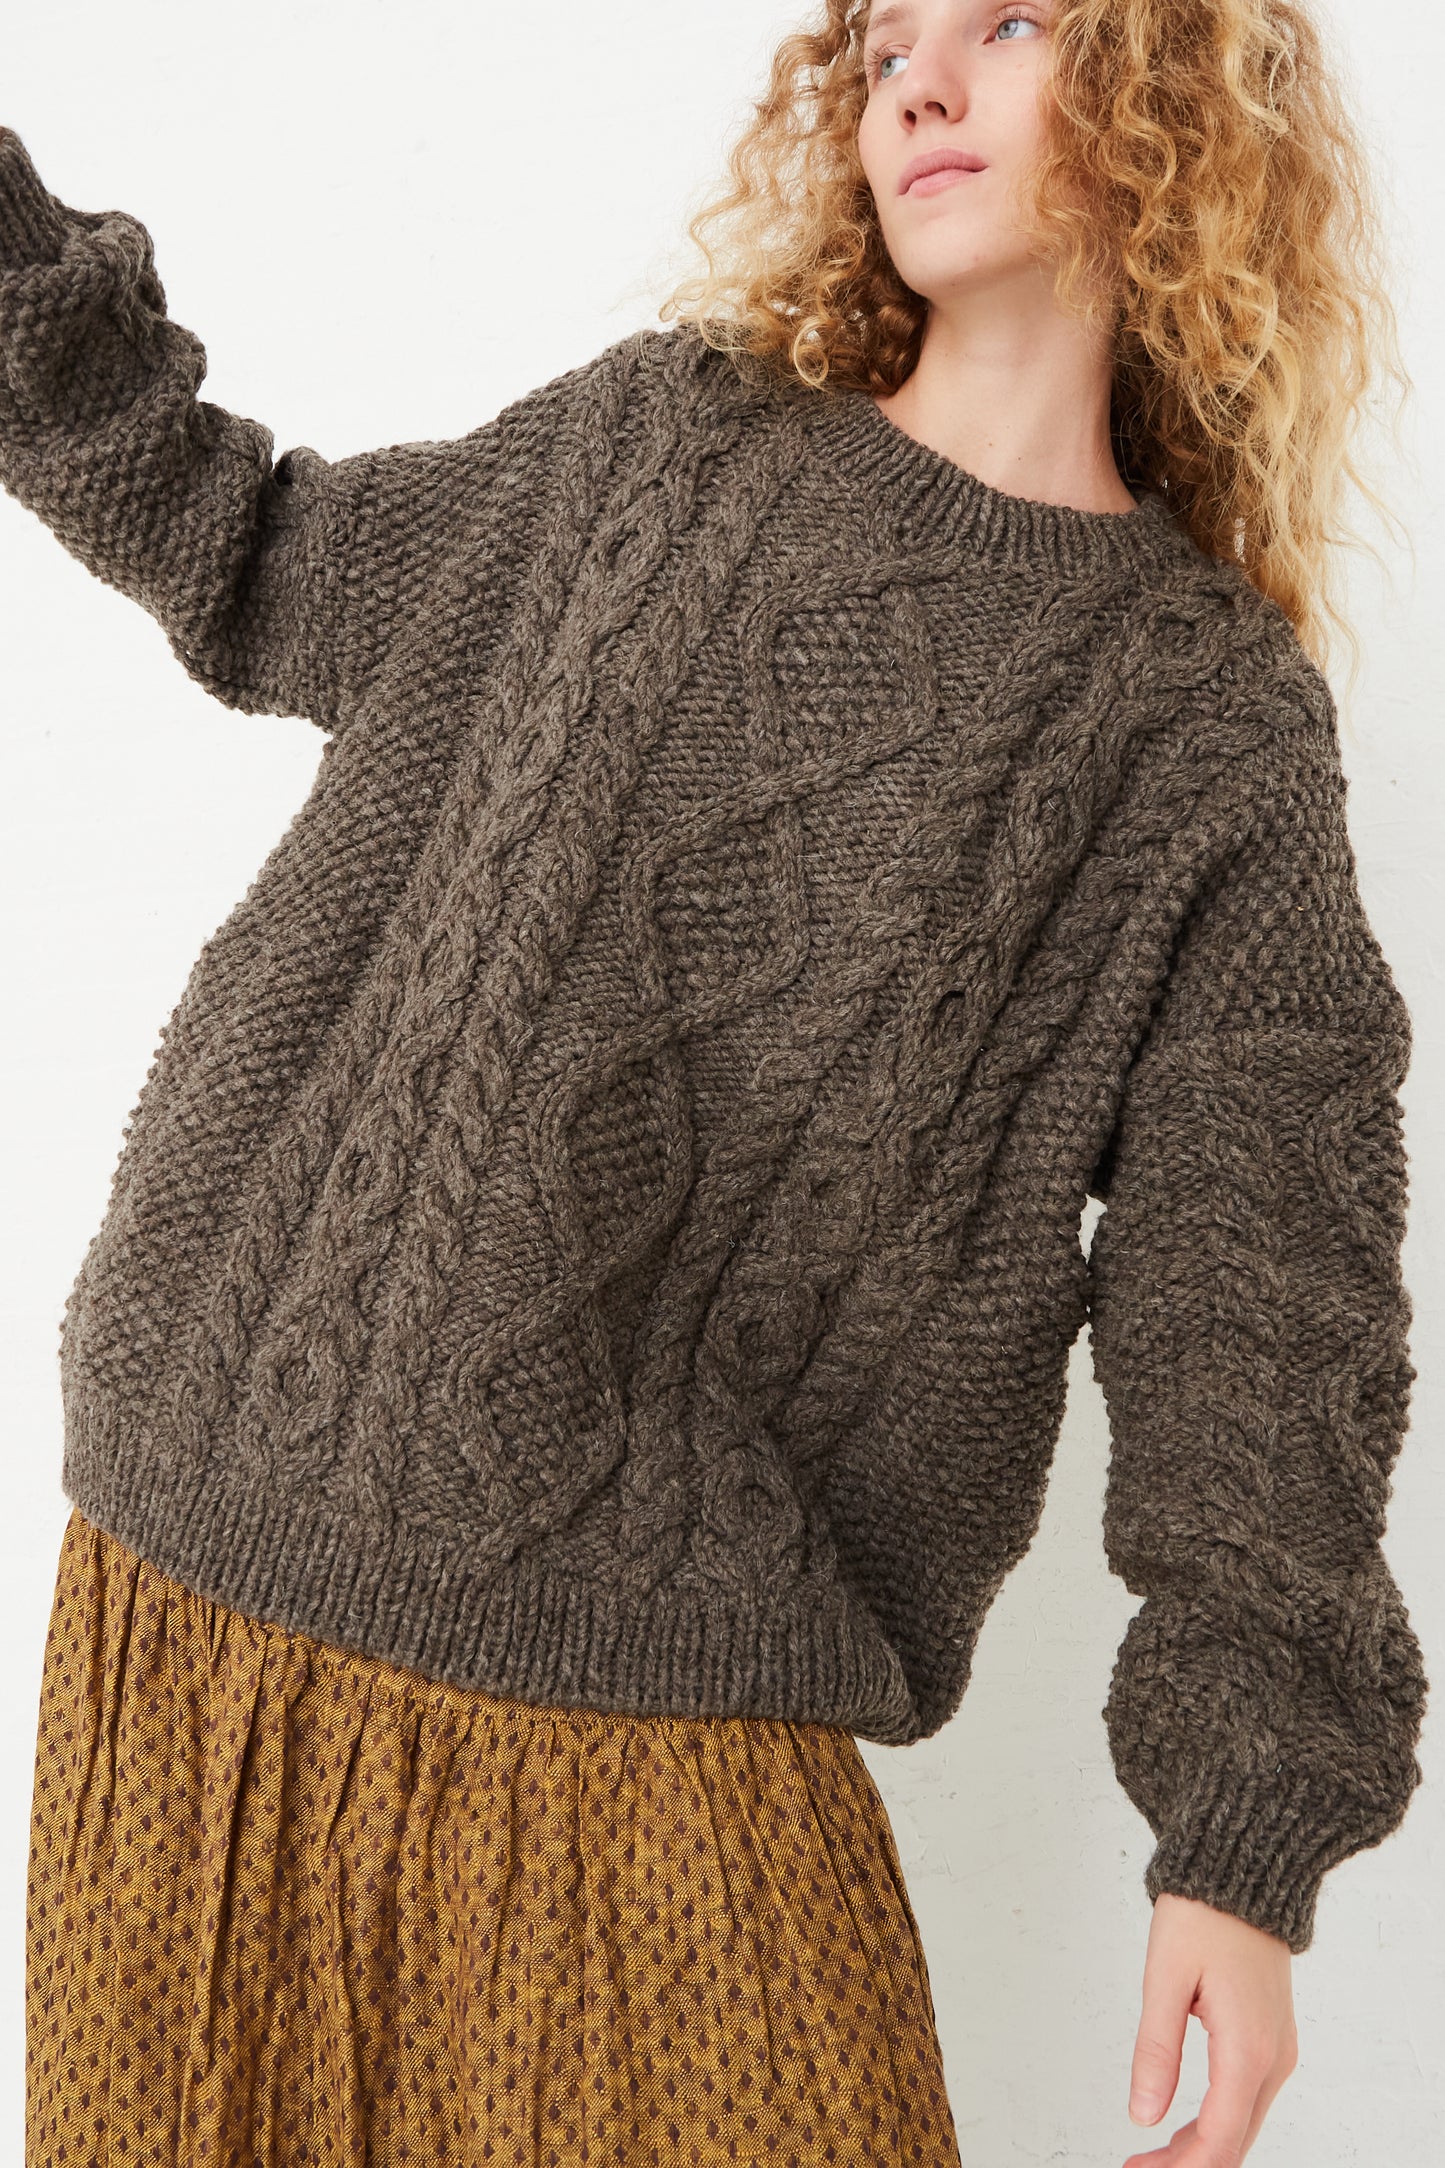 The model is wearing an Ichi Antiquités Wool Hand-Knit Pullover in Mocha.